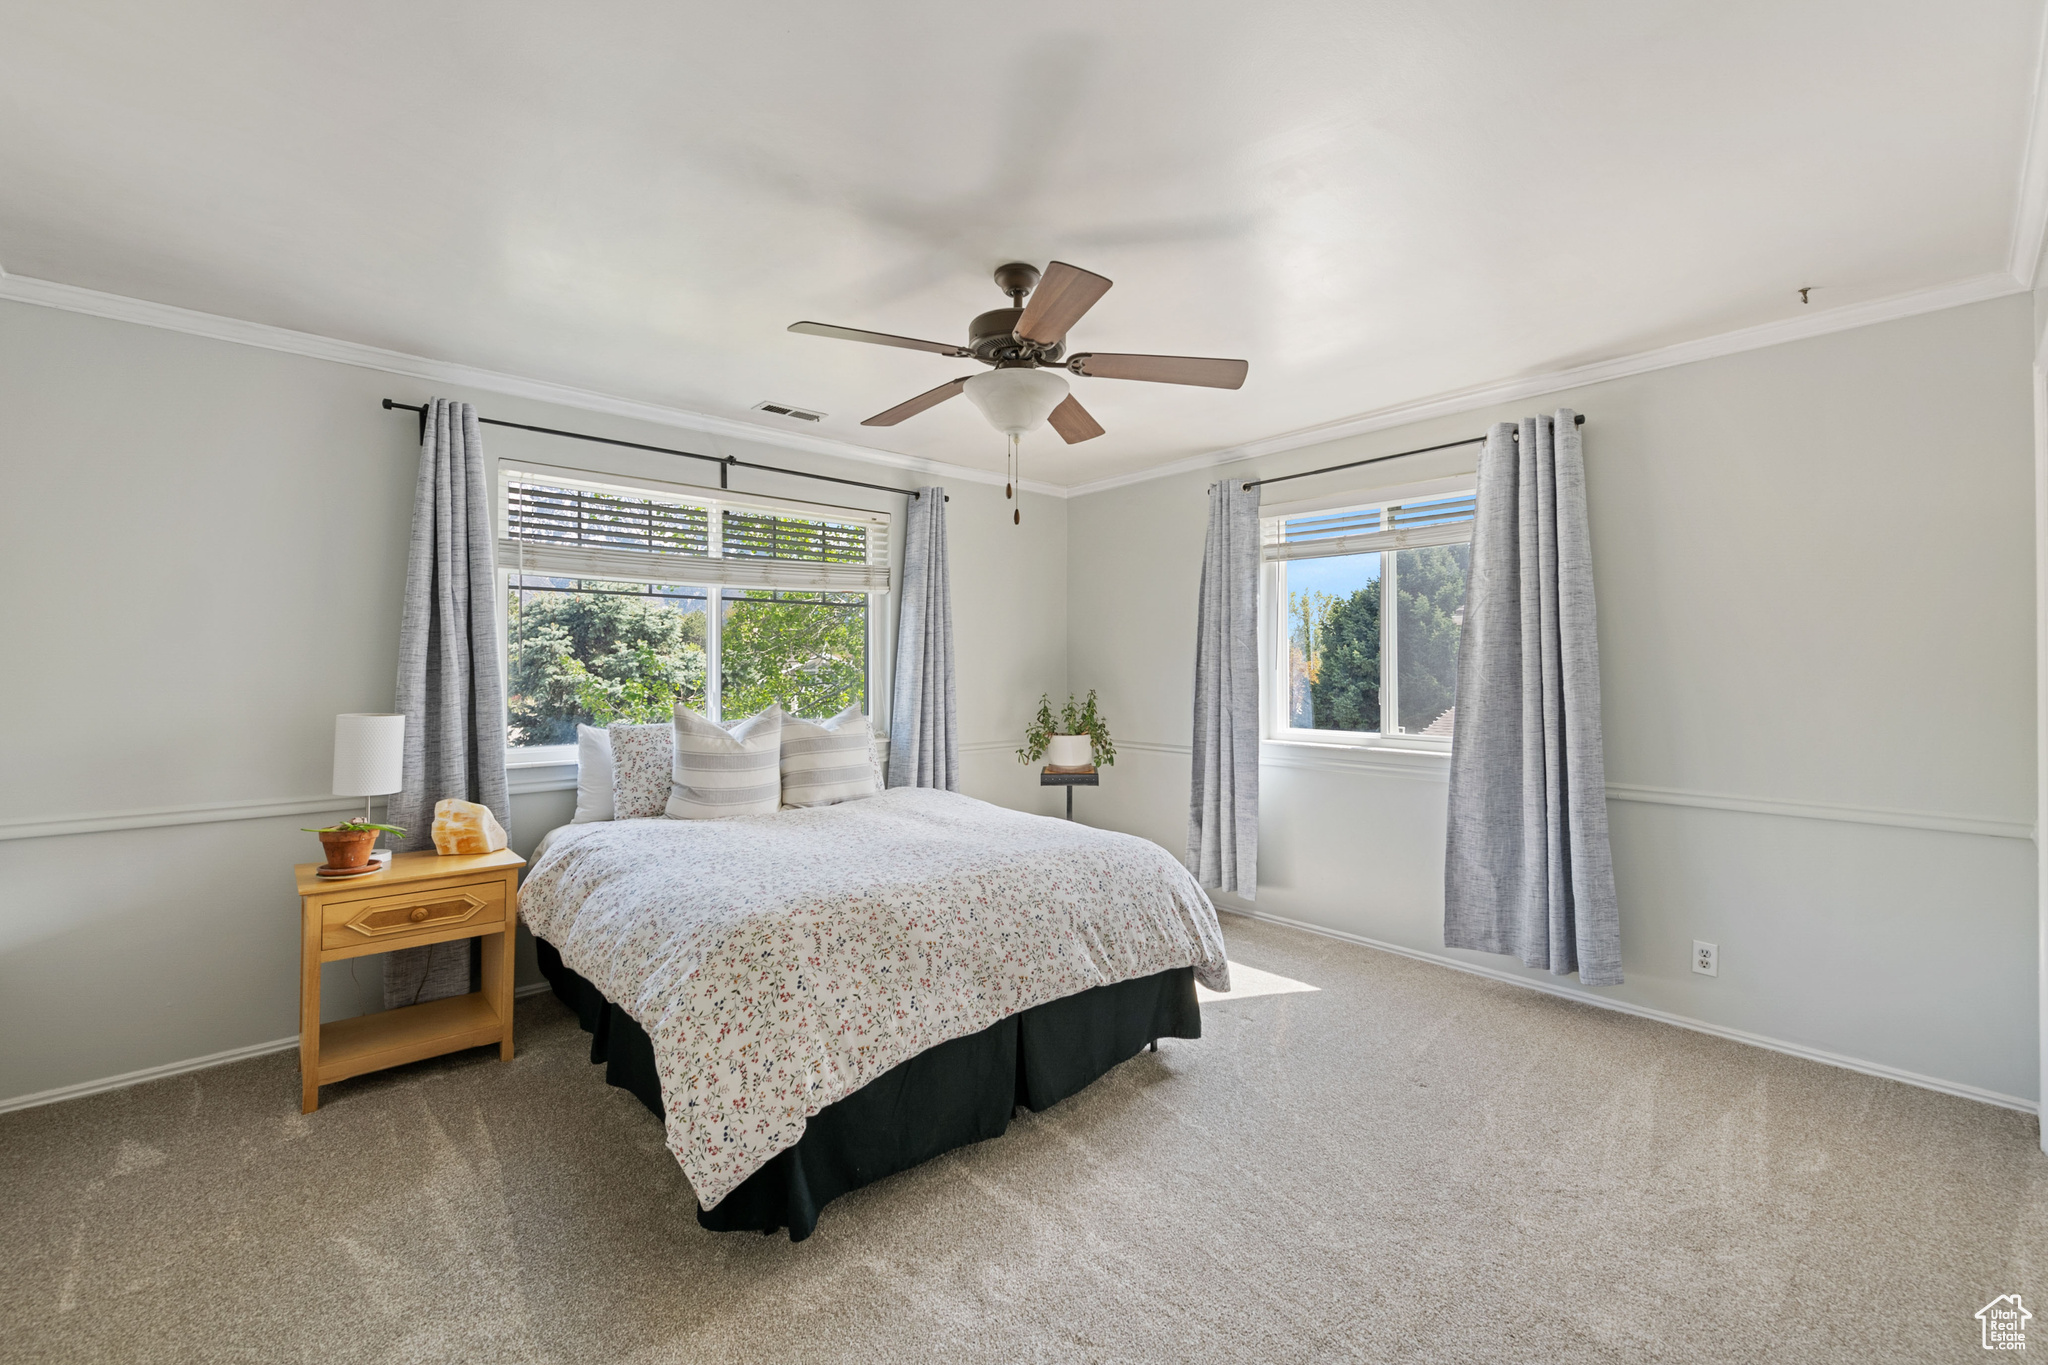 Bedroom with carpet flooring, ceiling fan, and ornamental molding